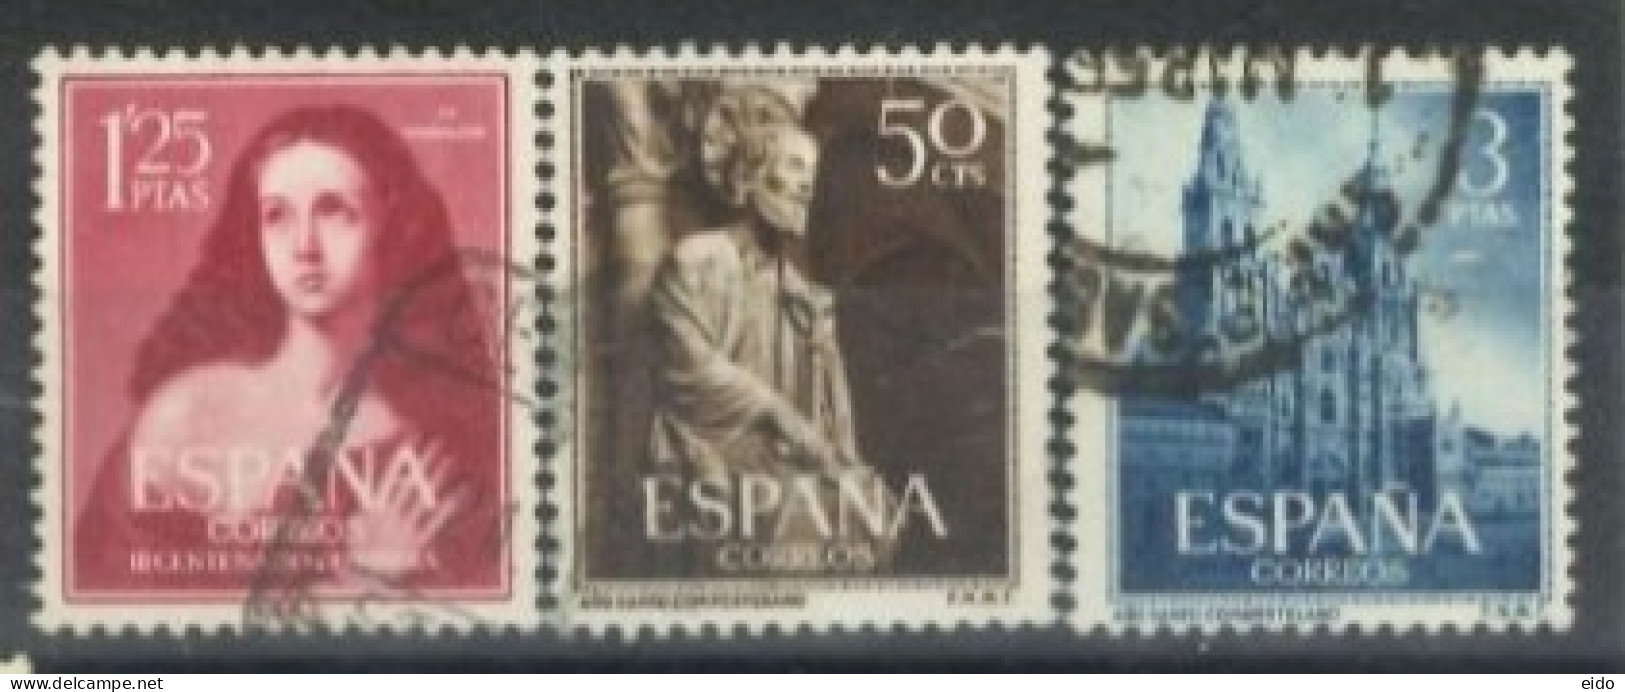 SPAIN,  1954, MAGDALENE, ST. JAMES OF COMPOSTELA AND ST. JAMES CATHEDRAL STAMPS SET OF 3, # 798/800, USED. - Used Stamps